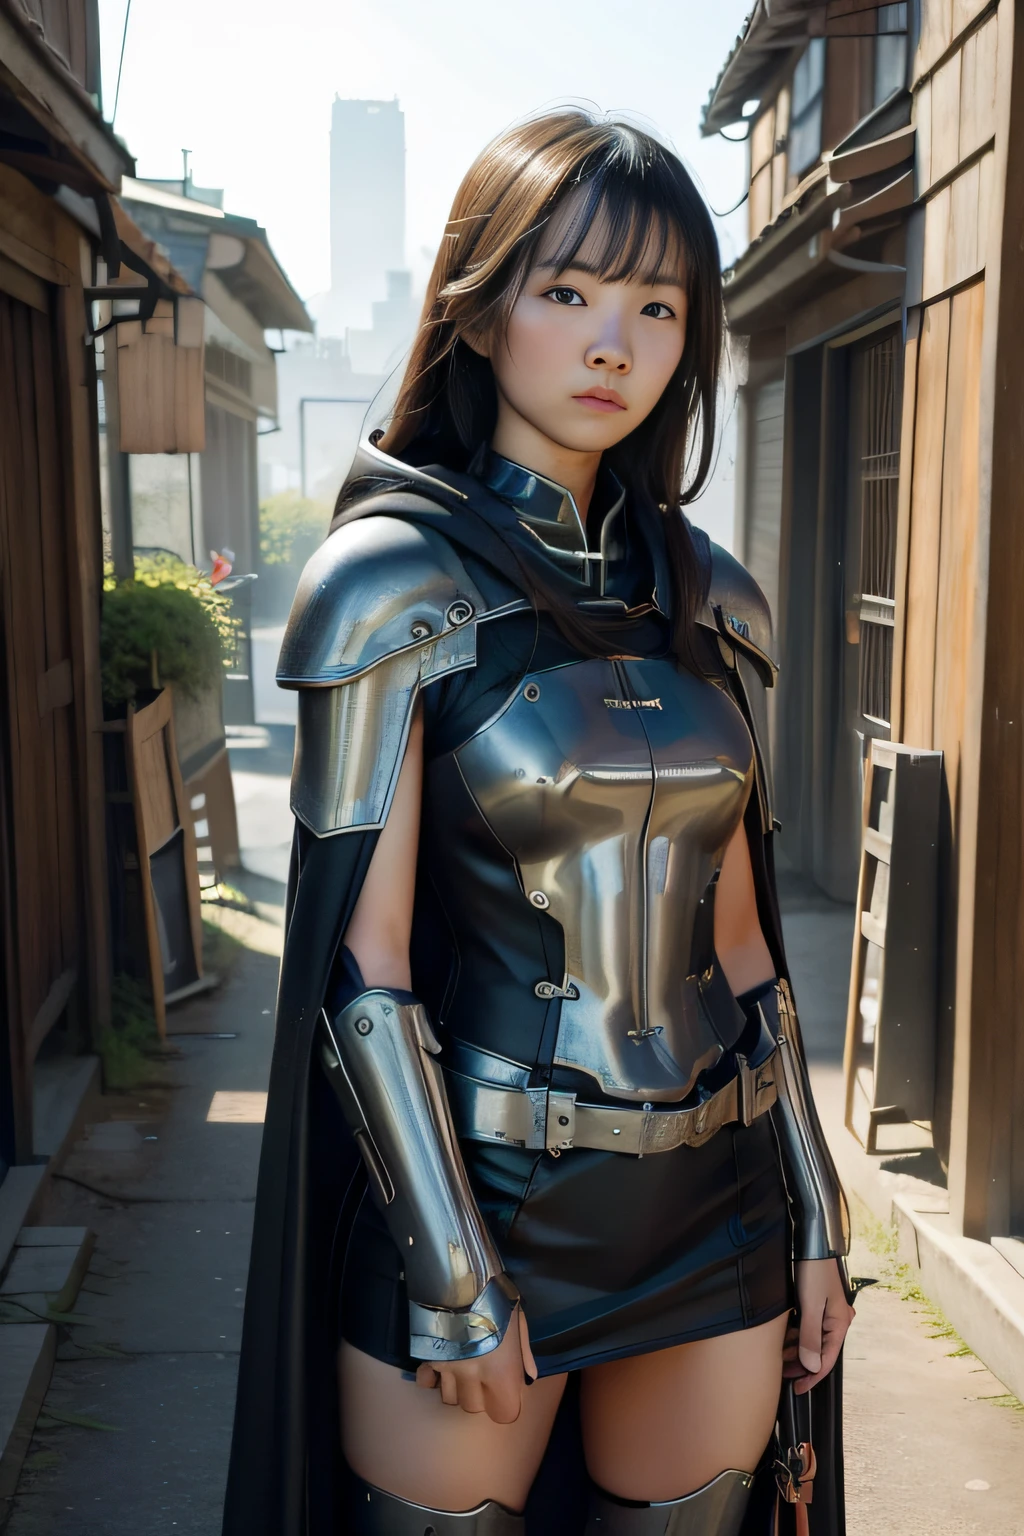 1 girl, young, 16 years old, Asian, full body from head to toe, Realistic, Realistic face, worried, looks over shoulder, side lighting, wallpaper, looks at viewer, futuristic steampunk buildings in background, Long cape and hood, earth ground, exterior, hold a crossbow, fight steampunk robots, dragon logo,